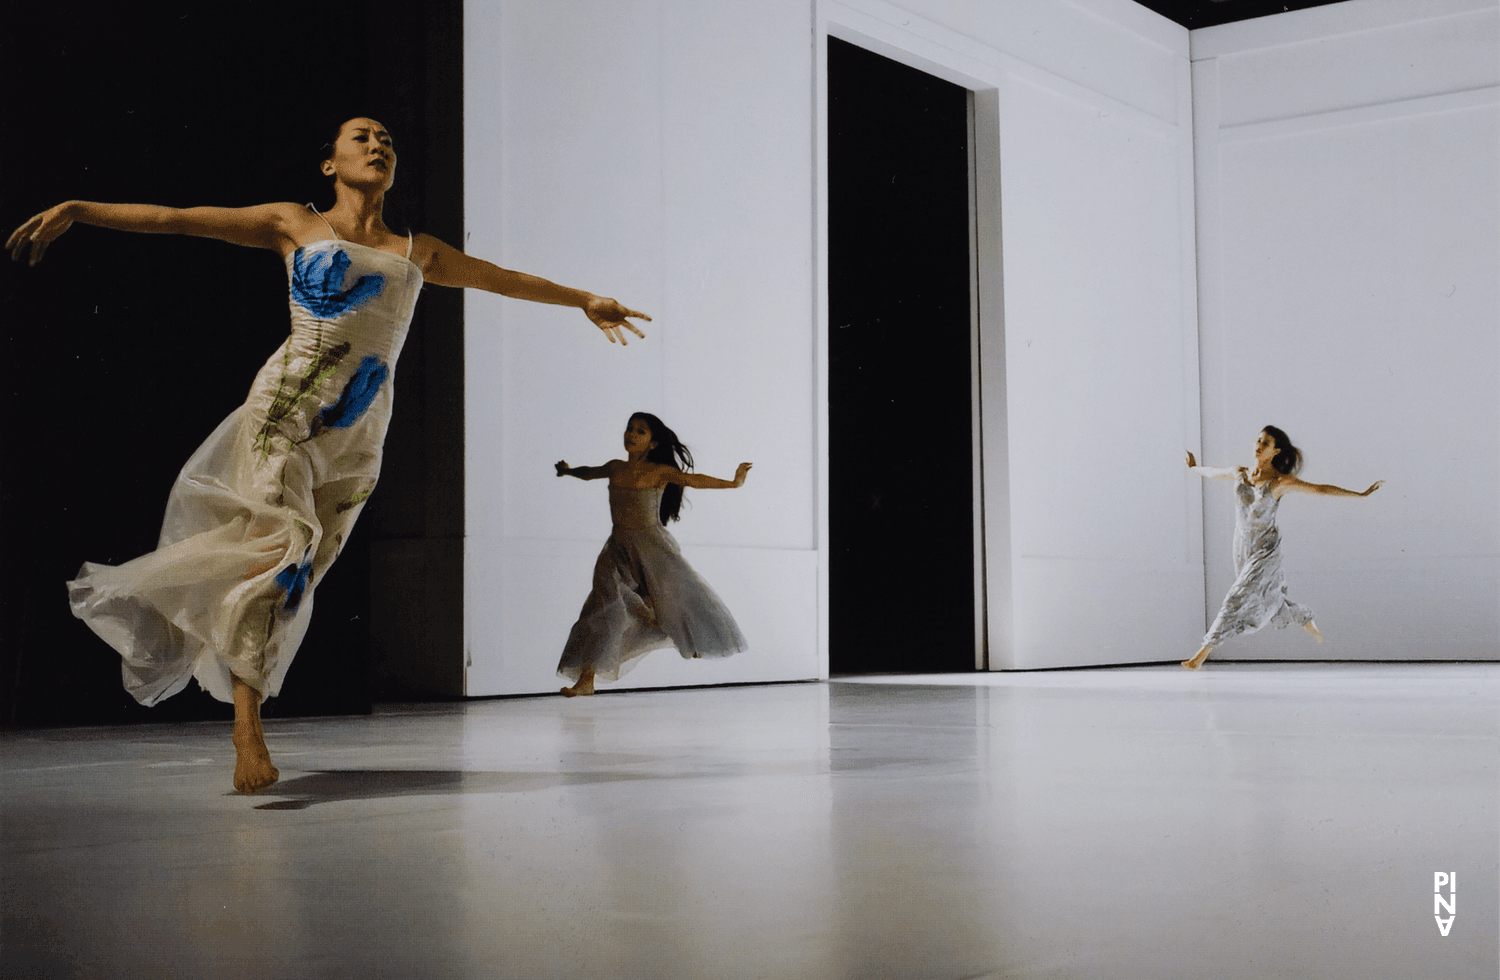 Azusa Seyama, Ditta Miranda Jasjfi and Clémentine Deluy in “For the Children of Yesterday, Today and Tomorrow” by Pina Bausch